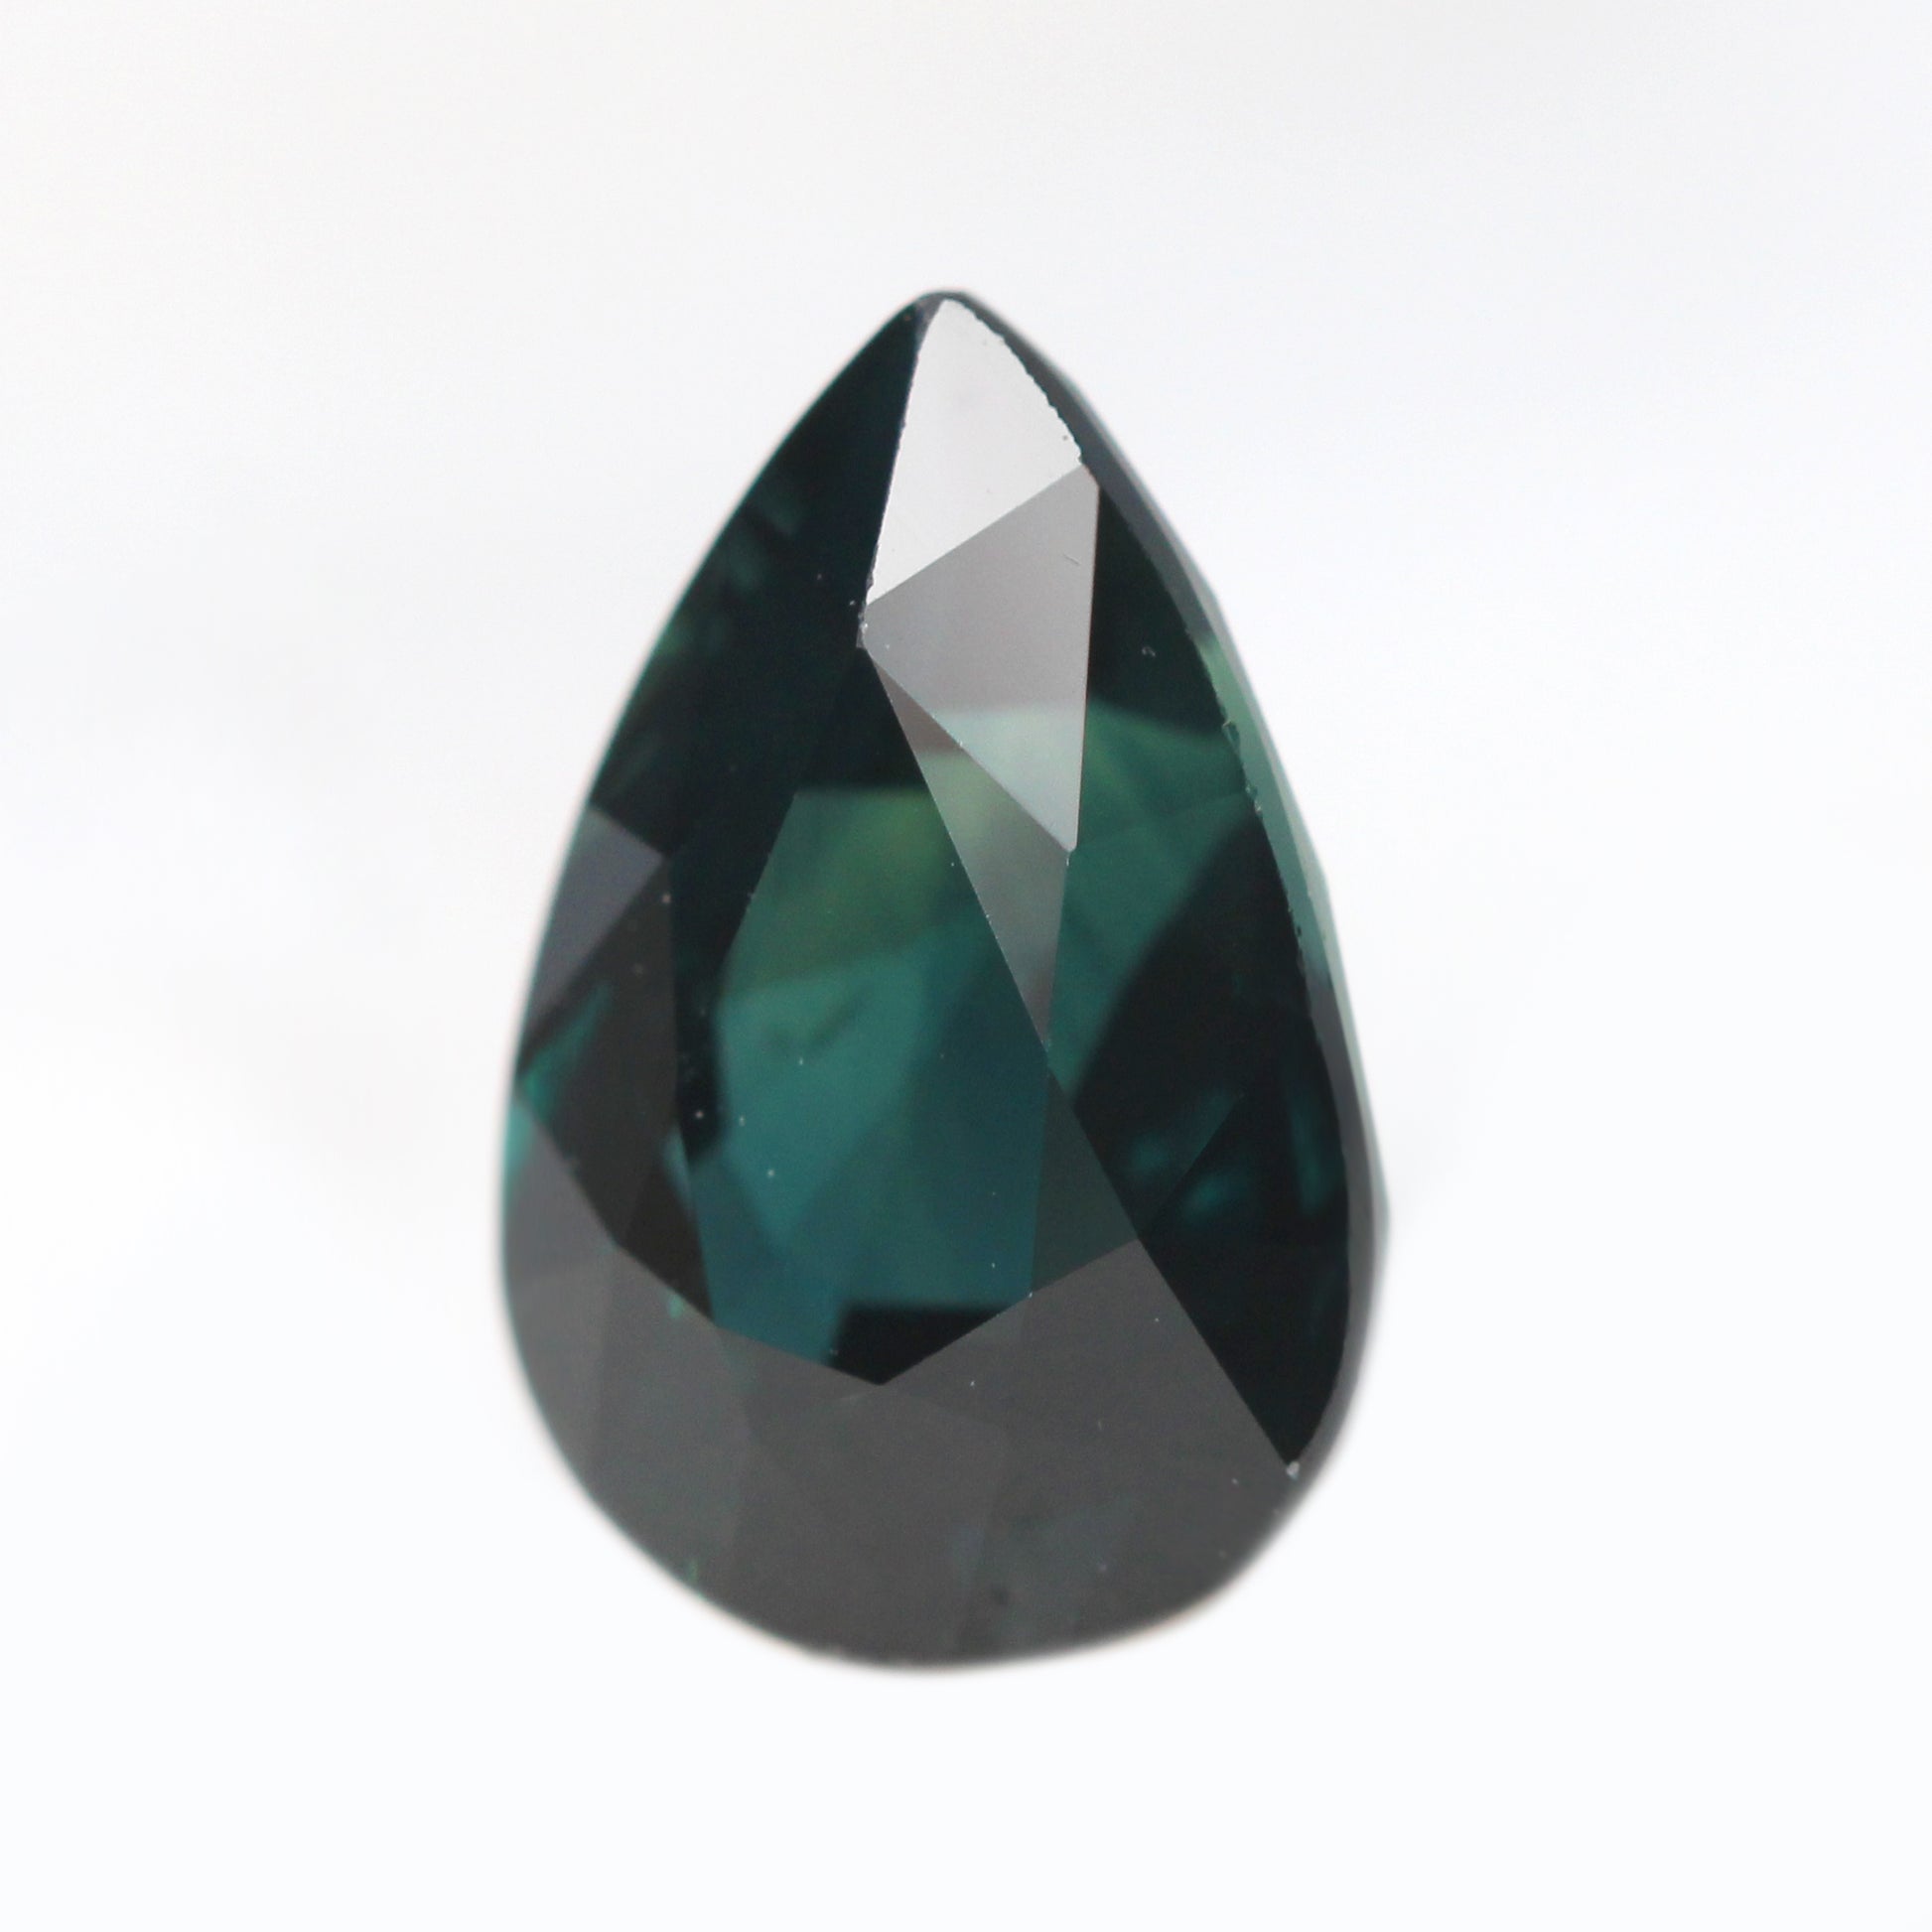 1.47 Carat Dark Teal Pear Australian Sapphire for Custom Work - Inventory Code TPS147 - Midwinter Co. Alternative Bridal Rings and Modern Fine Jewelry